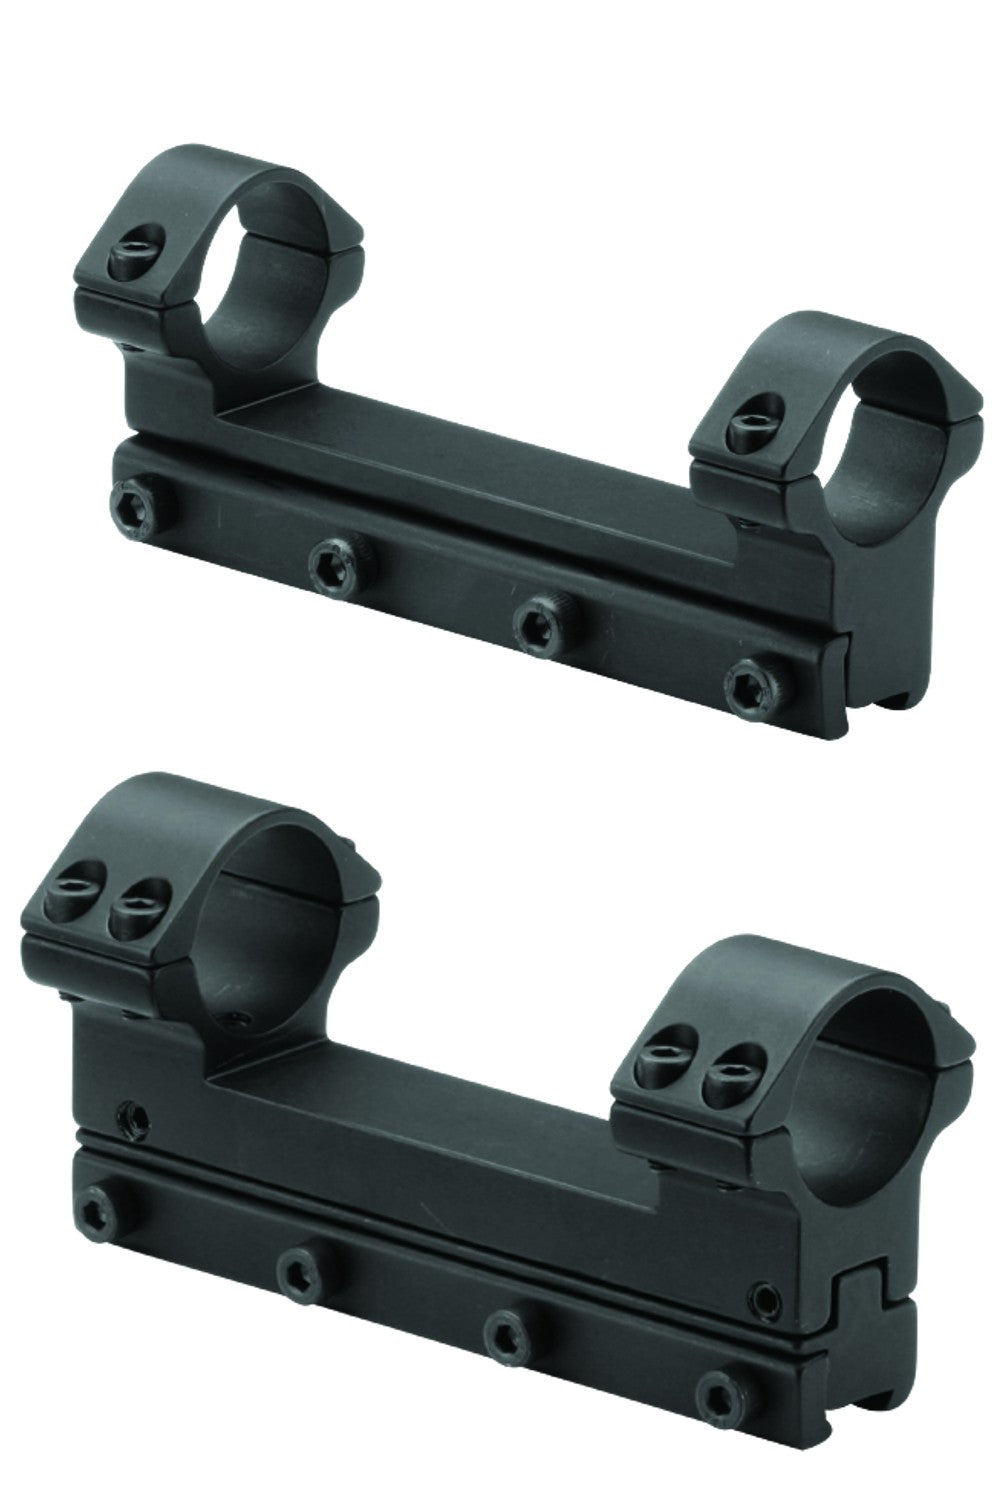 Bisley One Piece Angled Mounts in 25mm medium and 25mm high adjustable